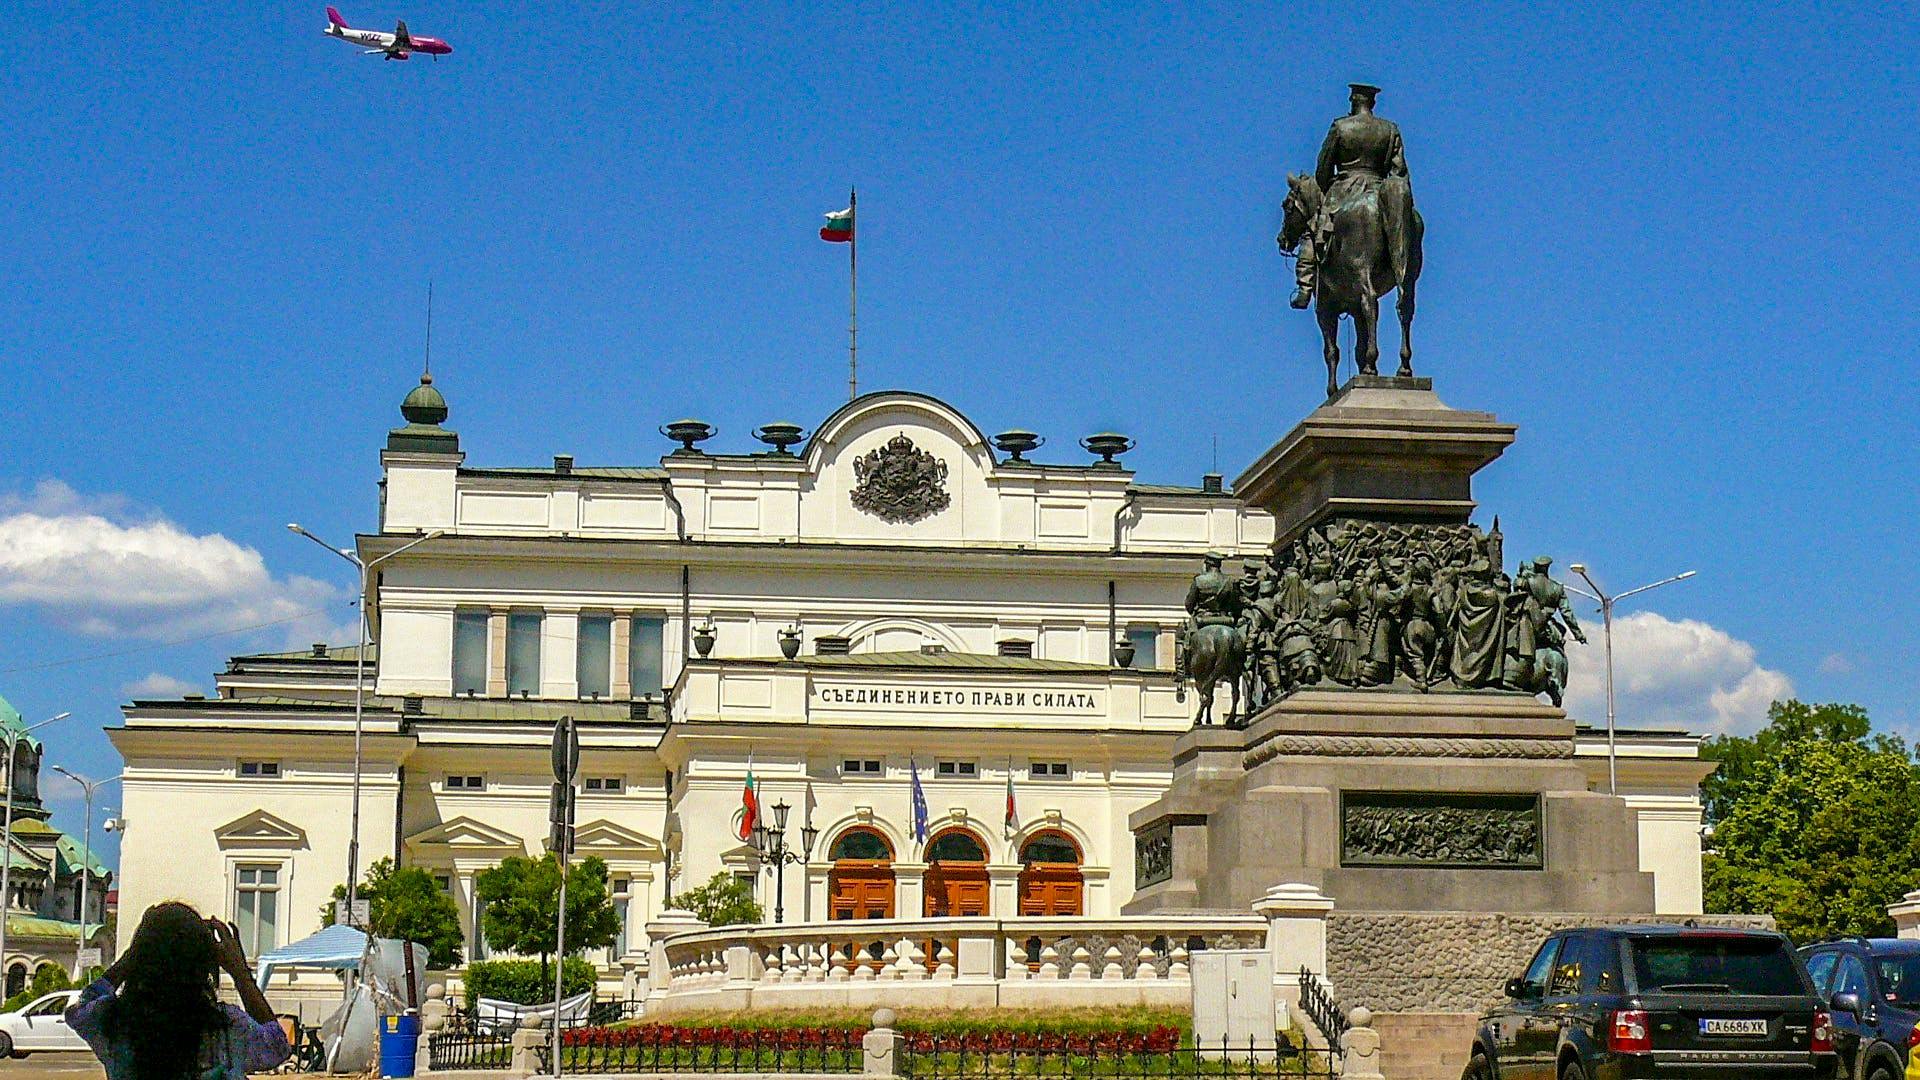 Discover Sofia in 60 minutes with a Local Musement